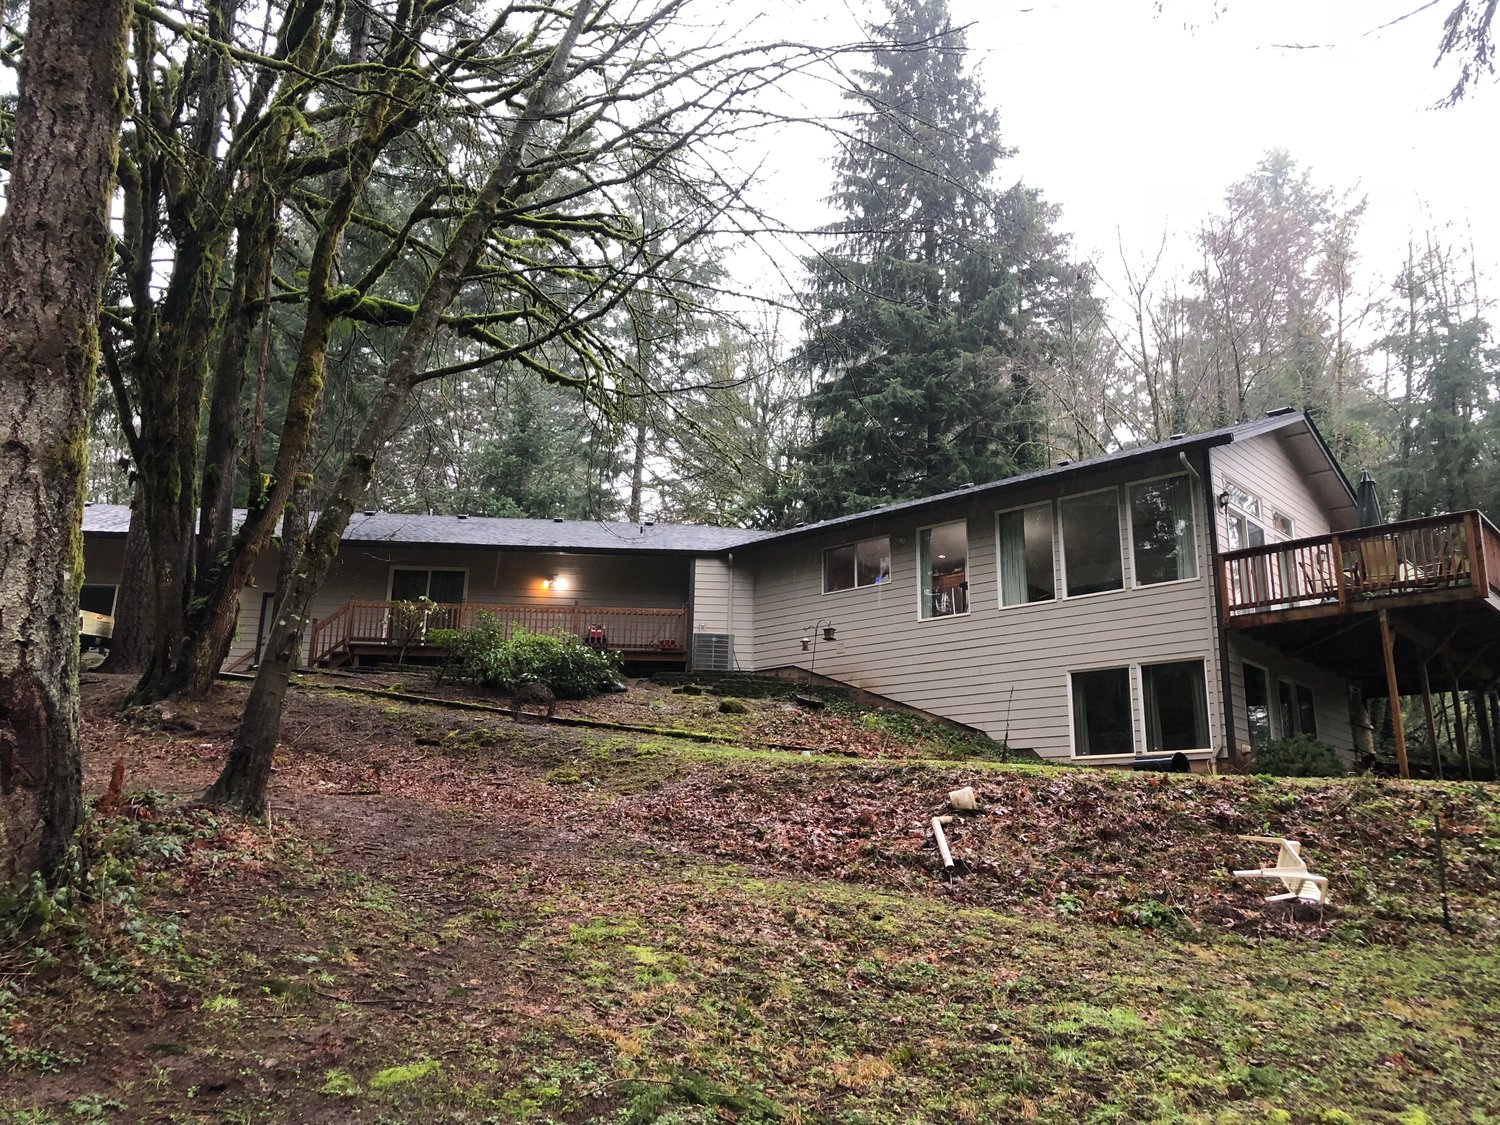 Marshall’s property is in the woods of La Center. Sam Etter said the contest was aimed at people who actually needed a new roof instead of just the general public.